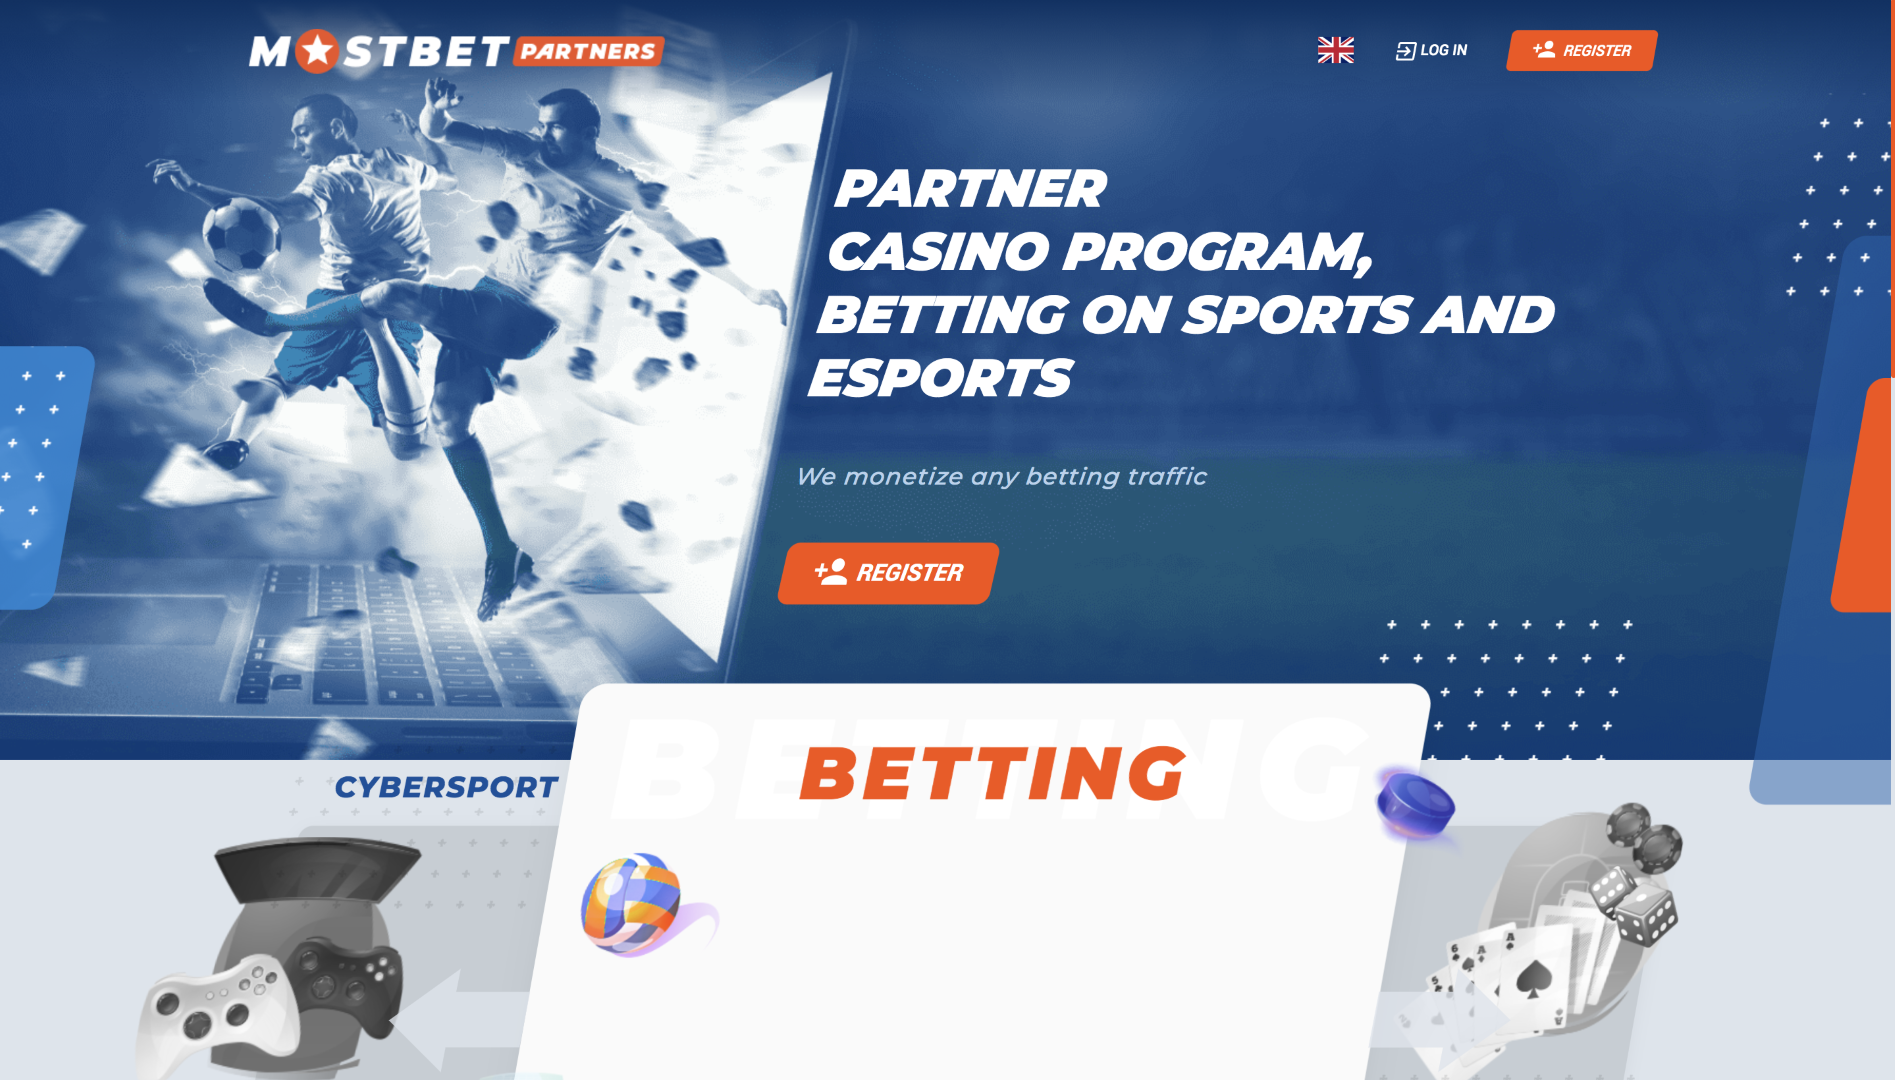 7 Rules About The Best Betting Site in Thailand is Mostbet Meant To Be Broken